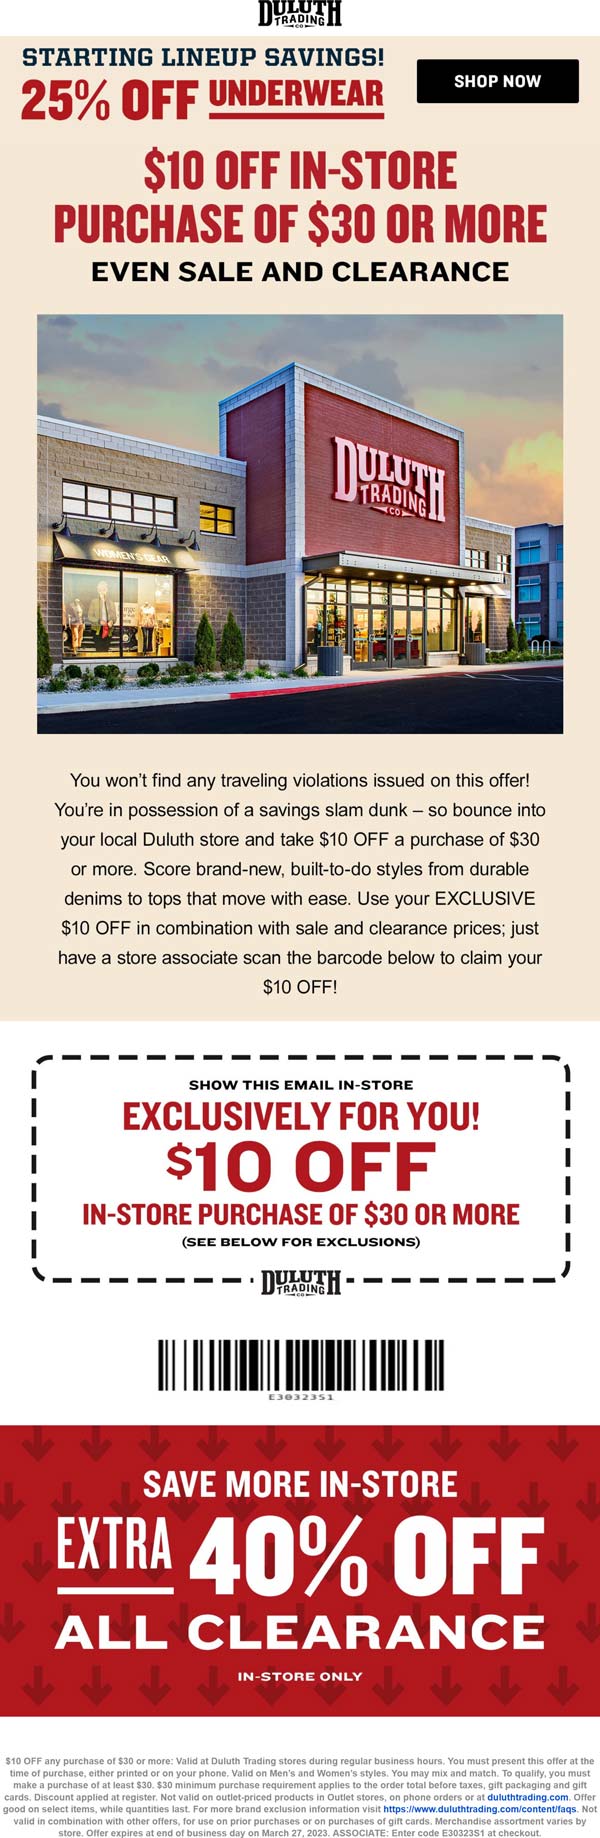 Duluth Trading stores Coupon  $10 off $30 at Duluth Trading Co #duluthtrading 